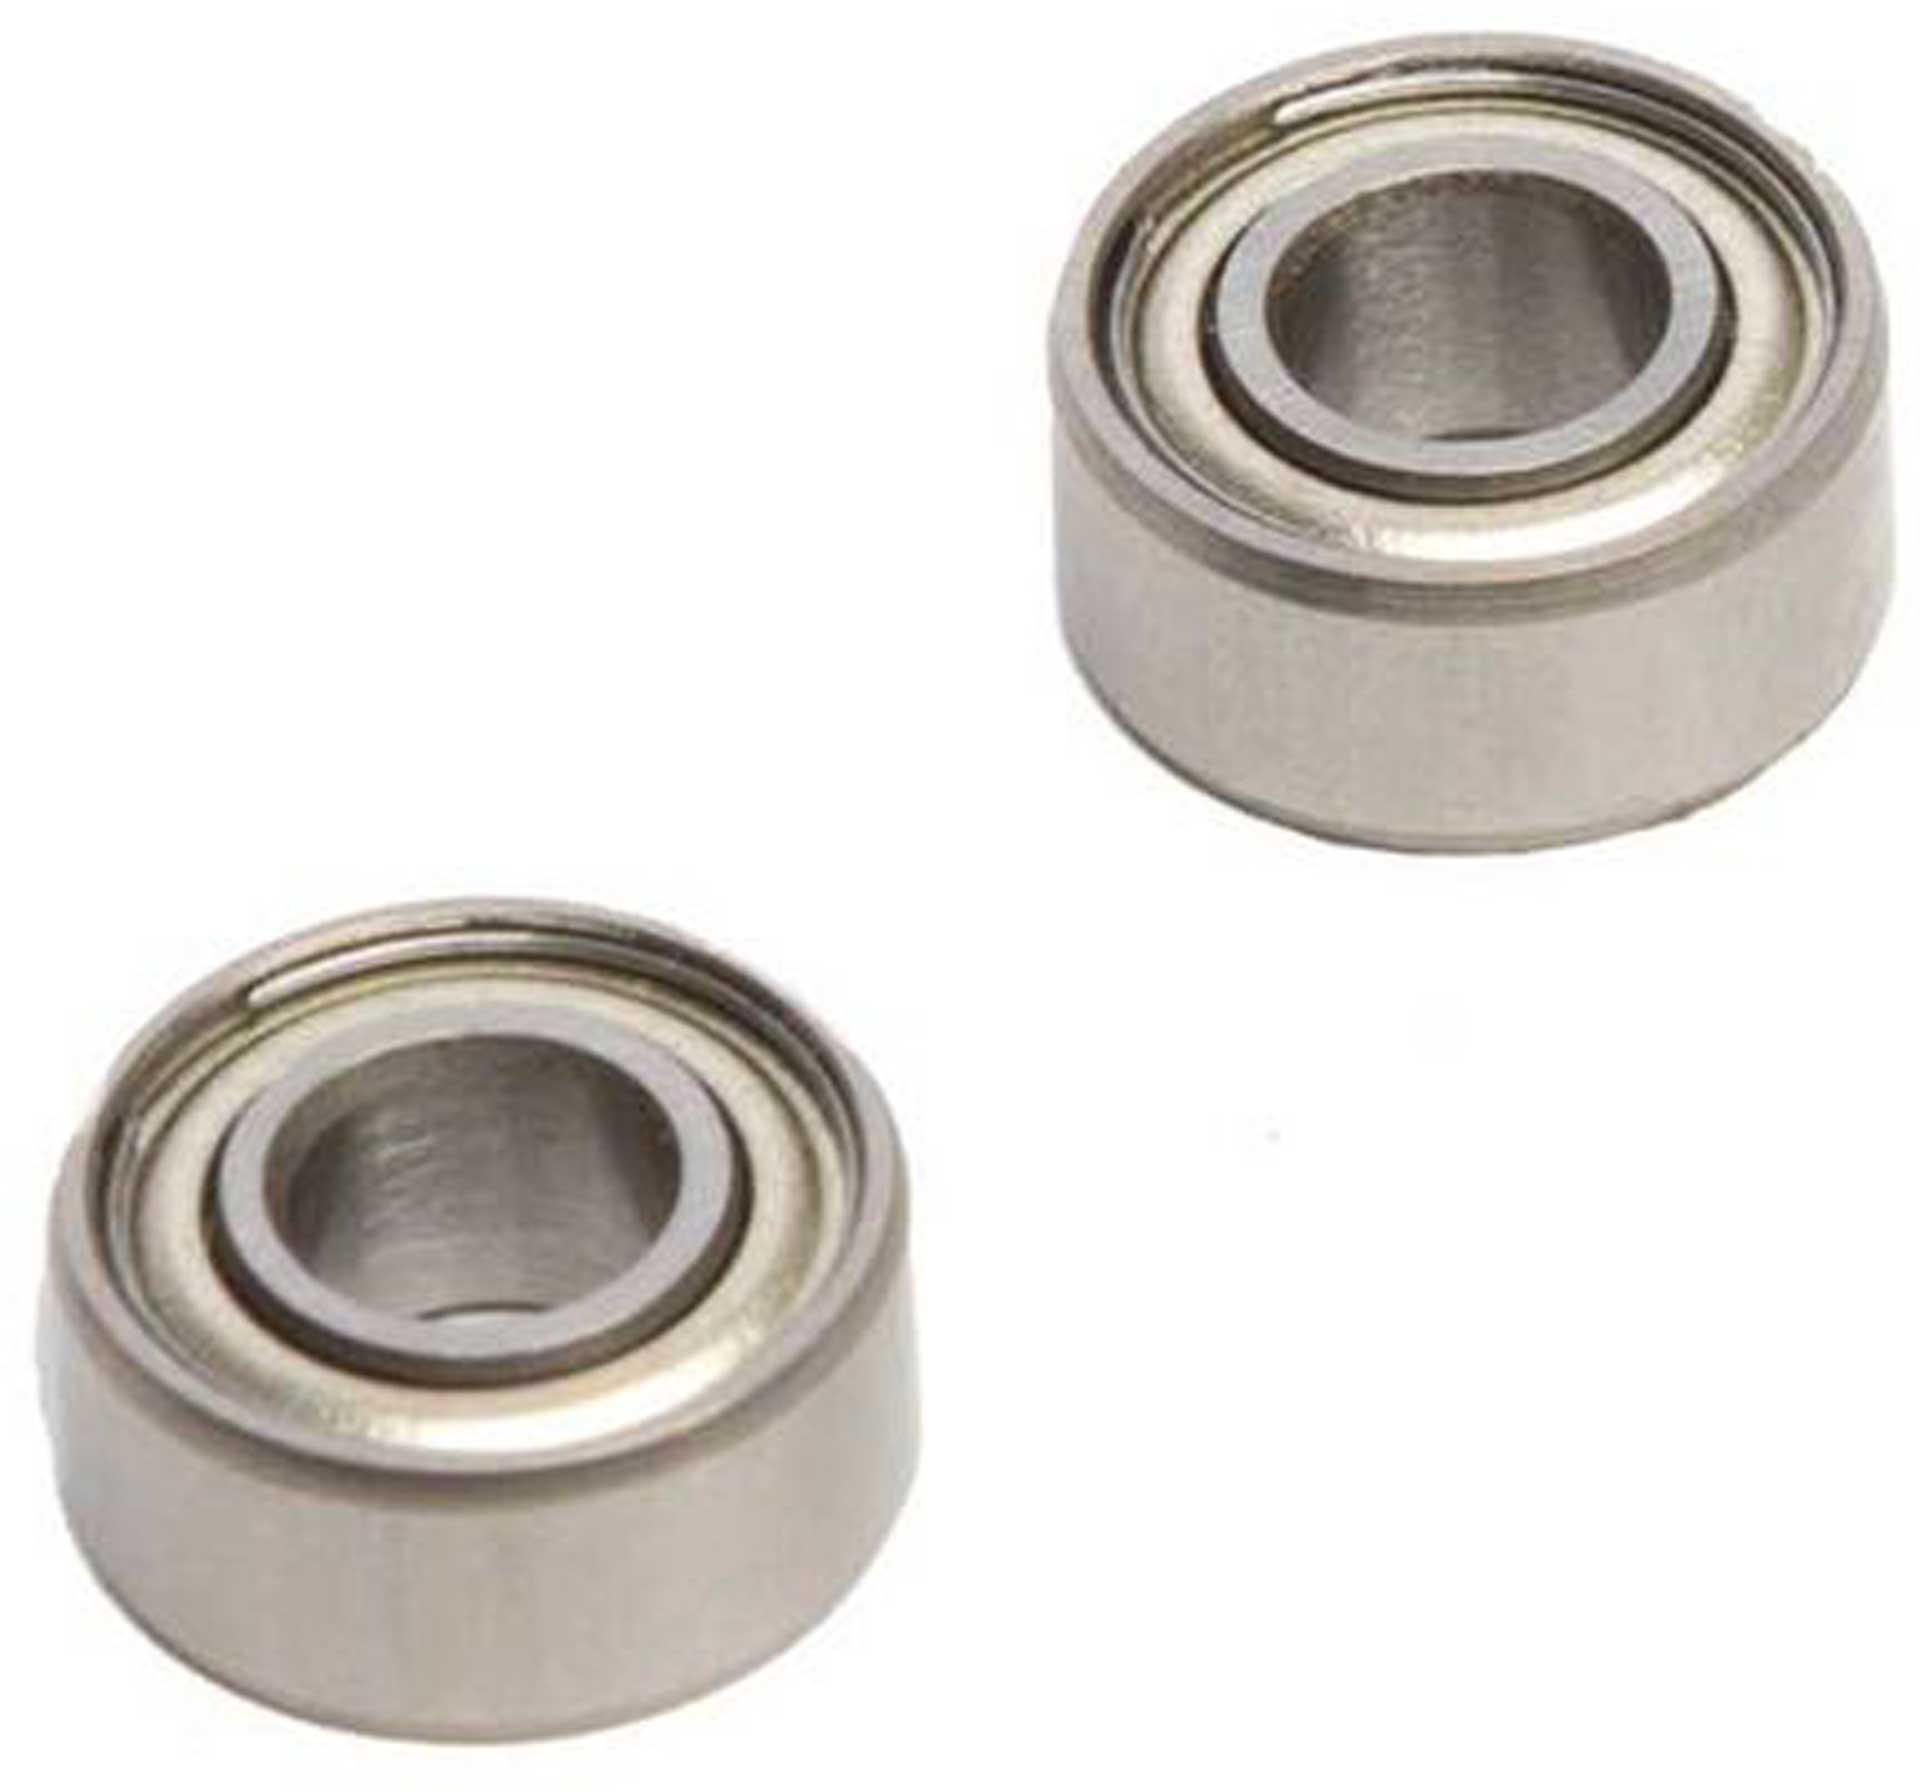 BLADE Radial Bearing, 4 x 9 x 4mm: Infusion 180